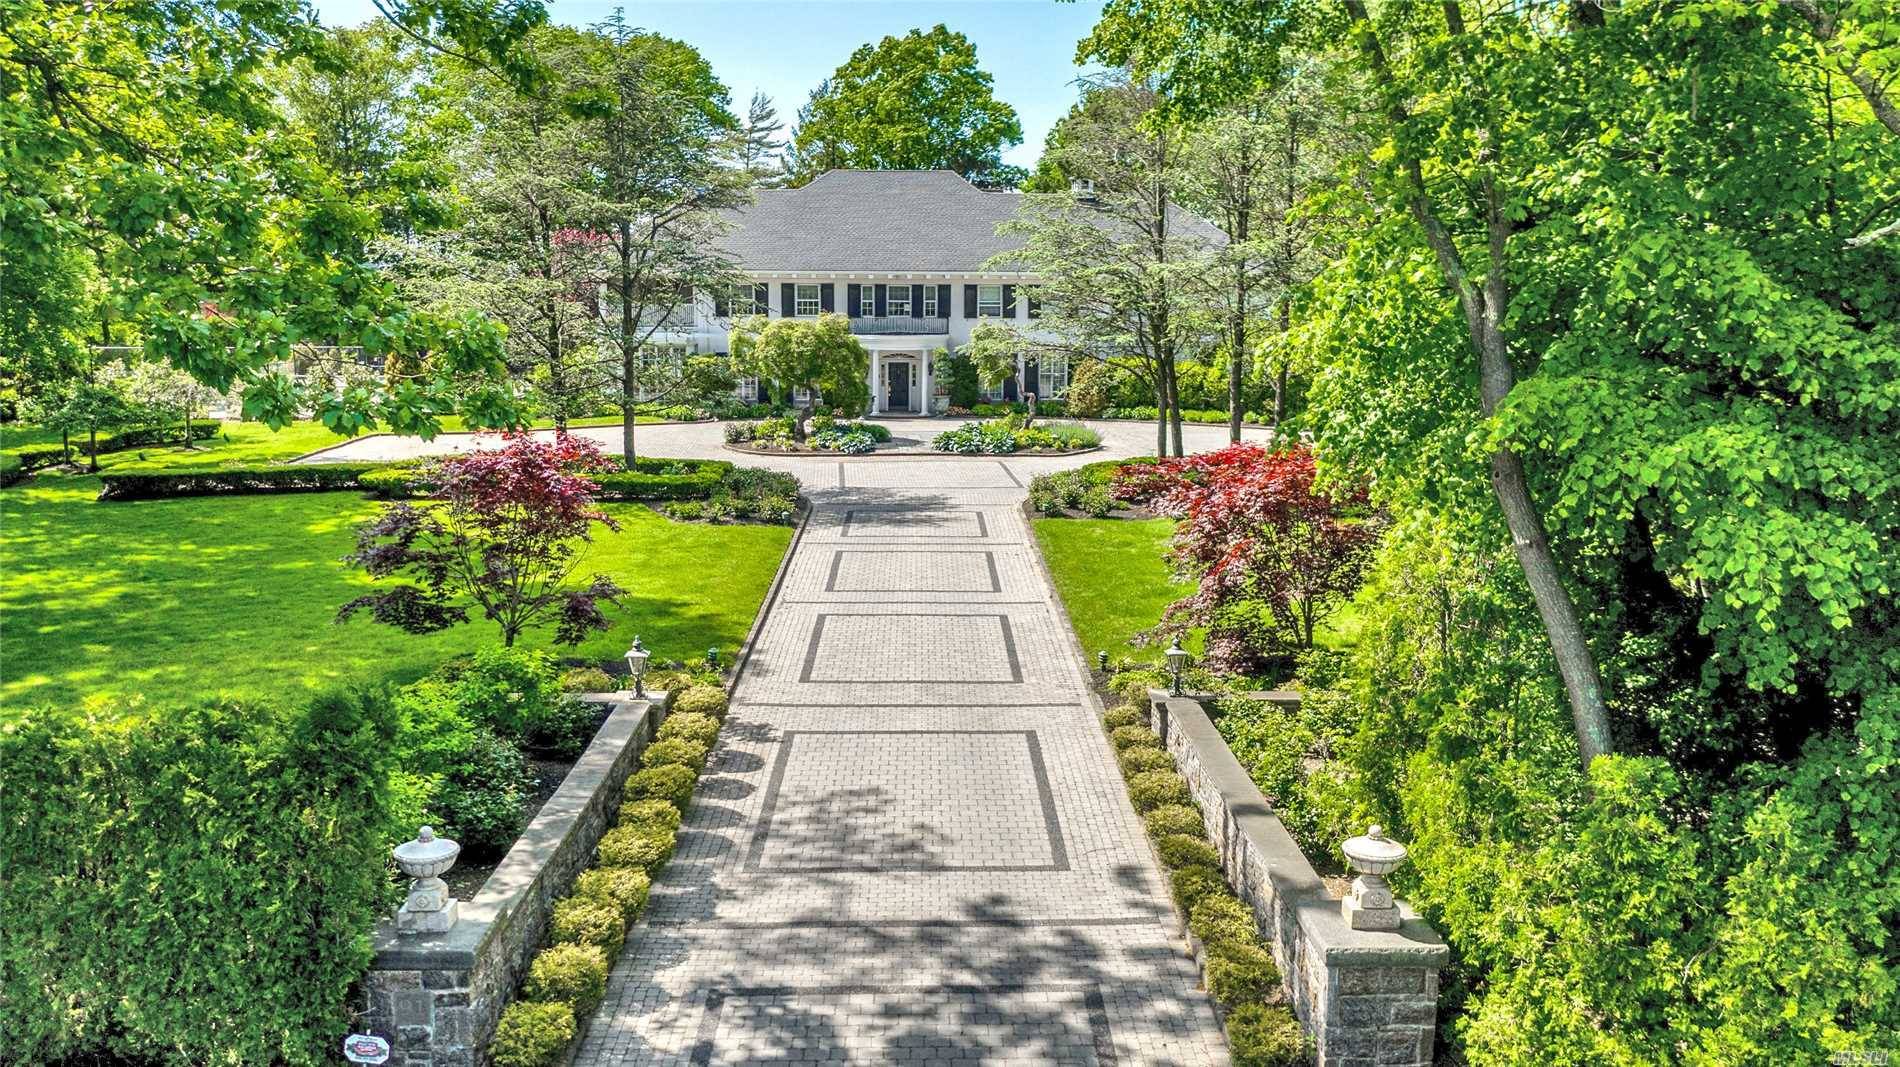 Elegant Grand Estatelike CH Colonial on 1 3 4 Acre Property.